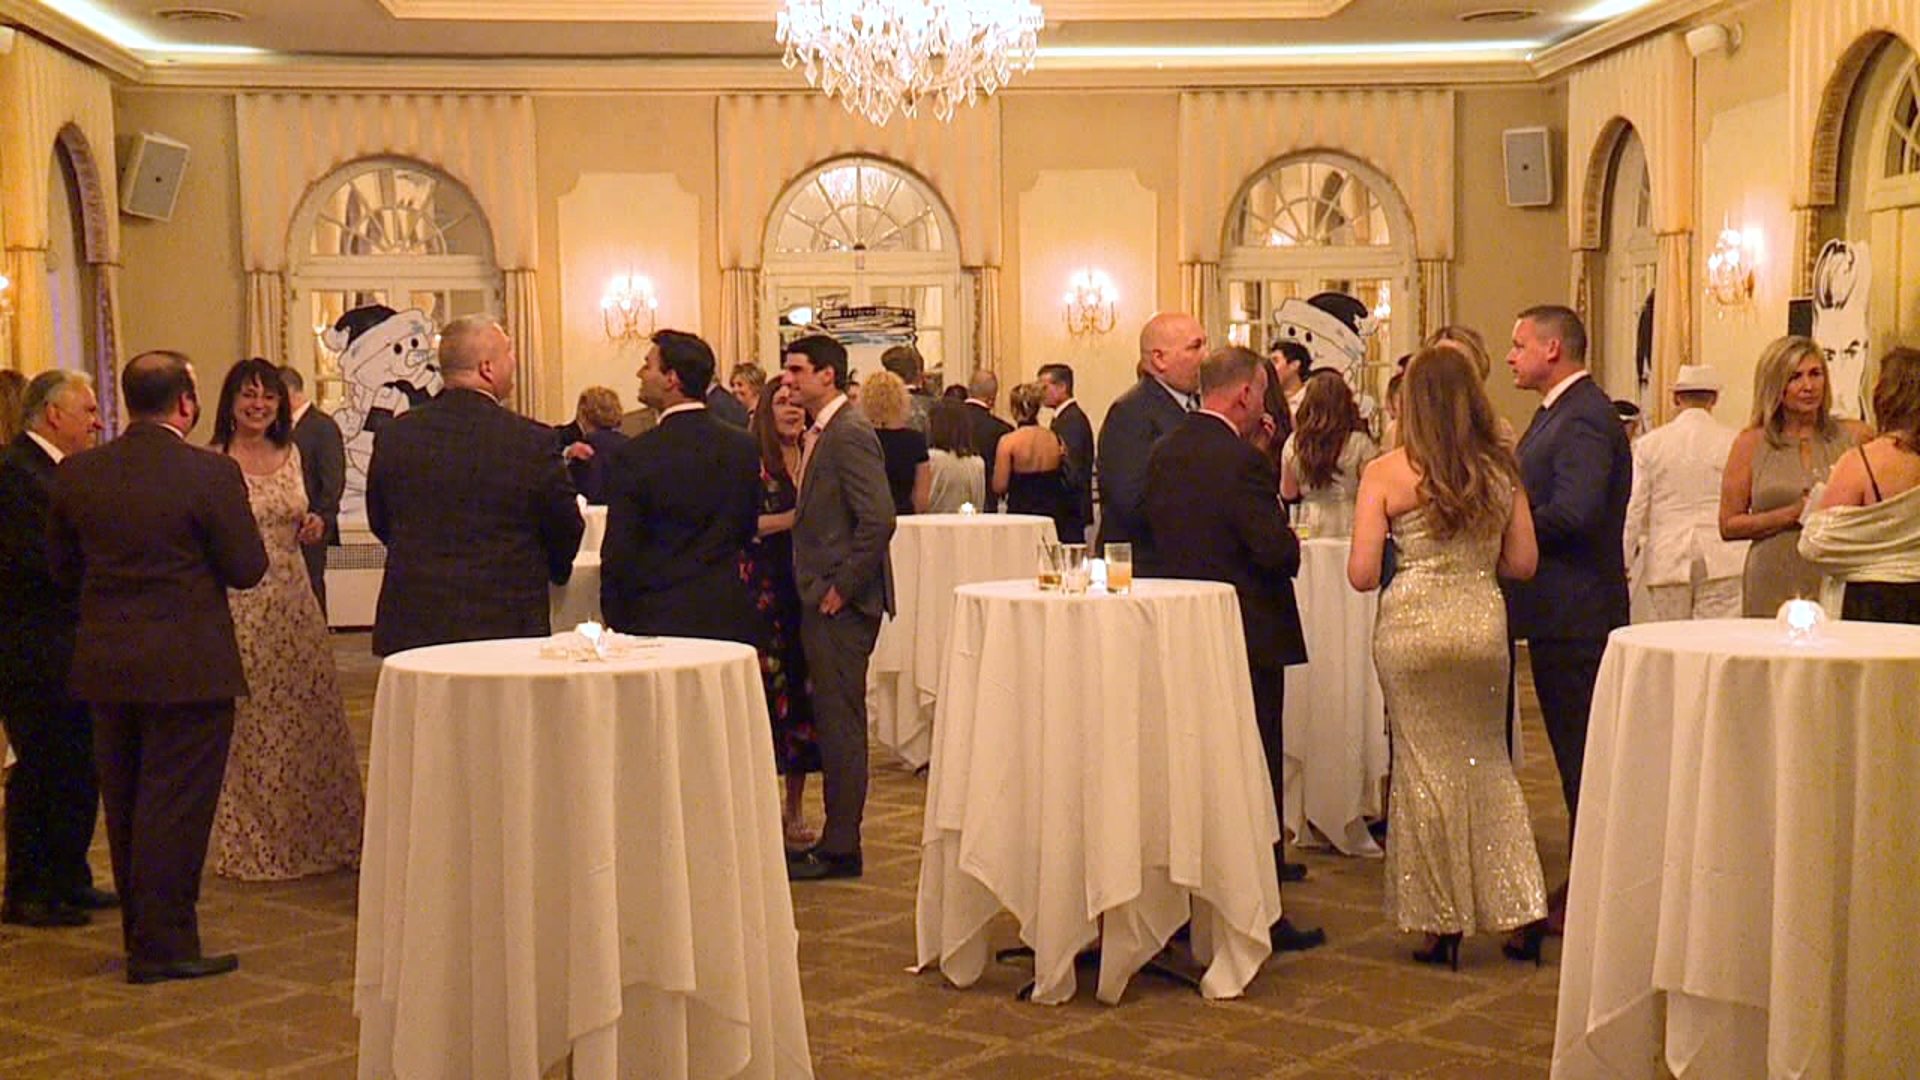 The annual Winter Wonderland Gala was held at the Westmoreland Club in Wilkes-Barre Saturday night.